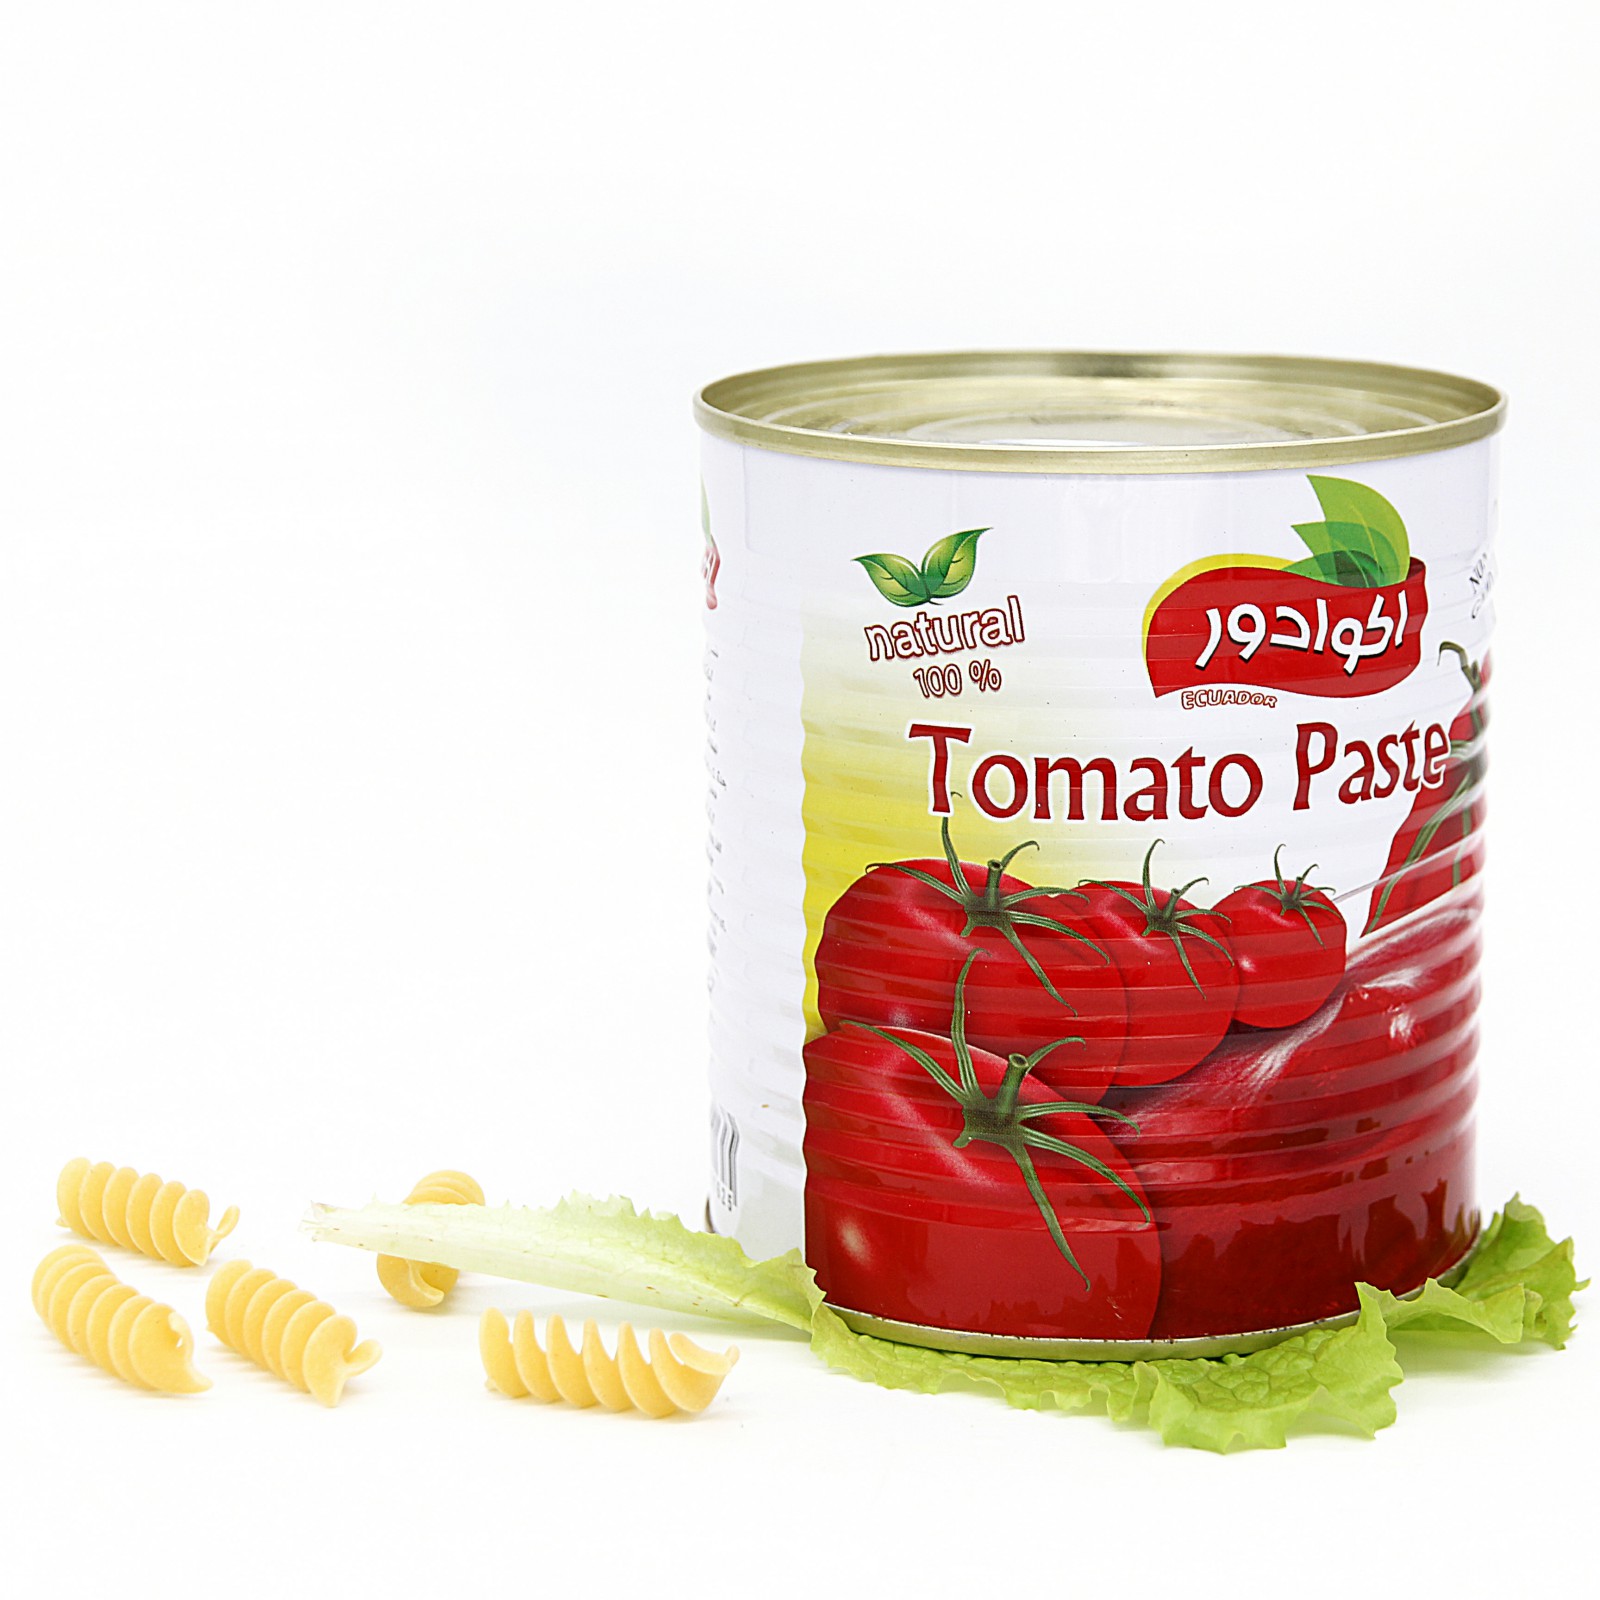 Canned tomato paste 800g